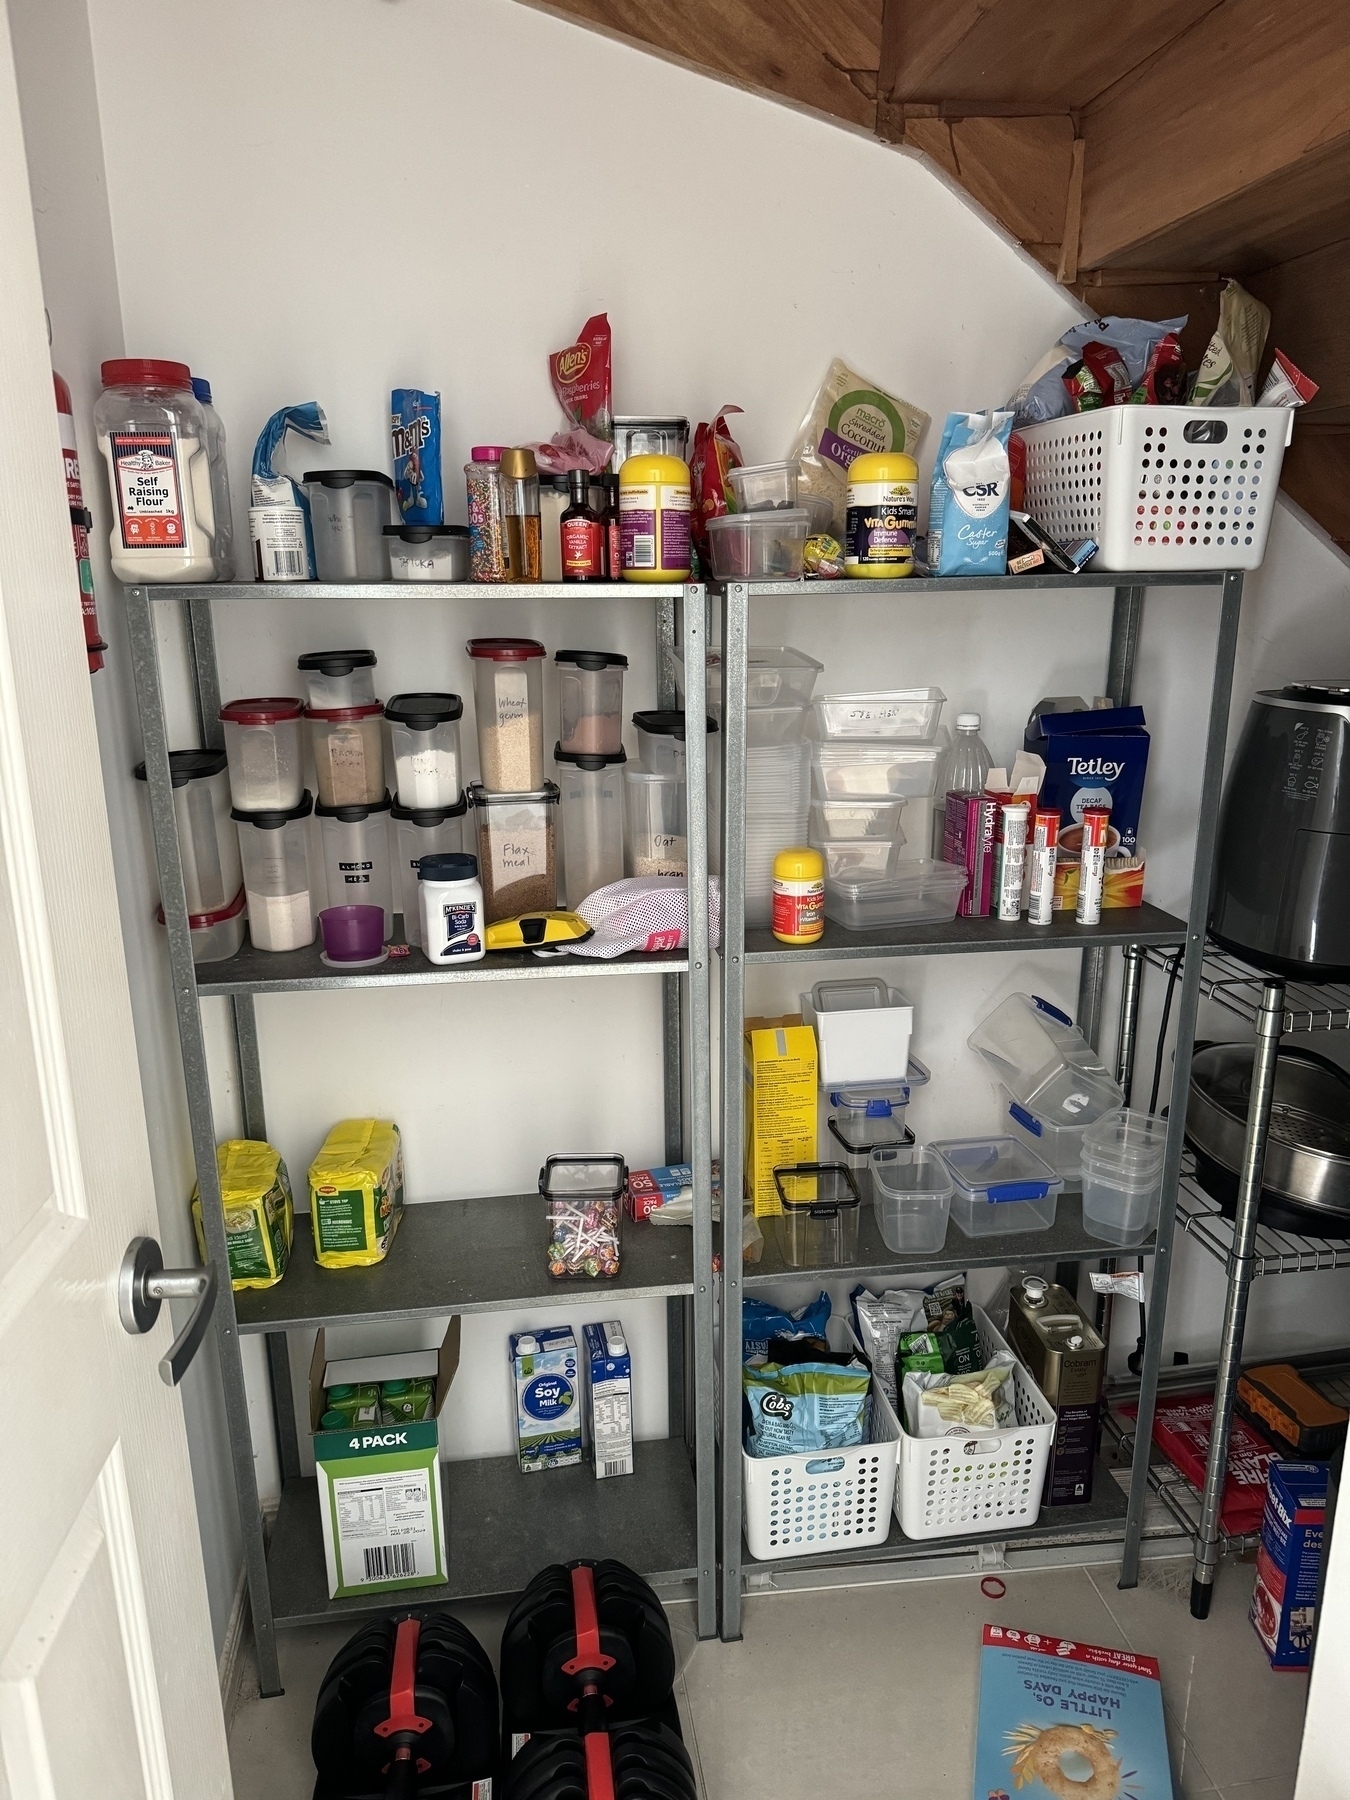 Some pantry shelves with assorted food items and containers